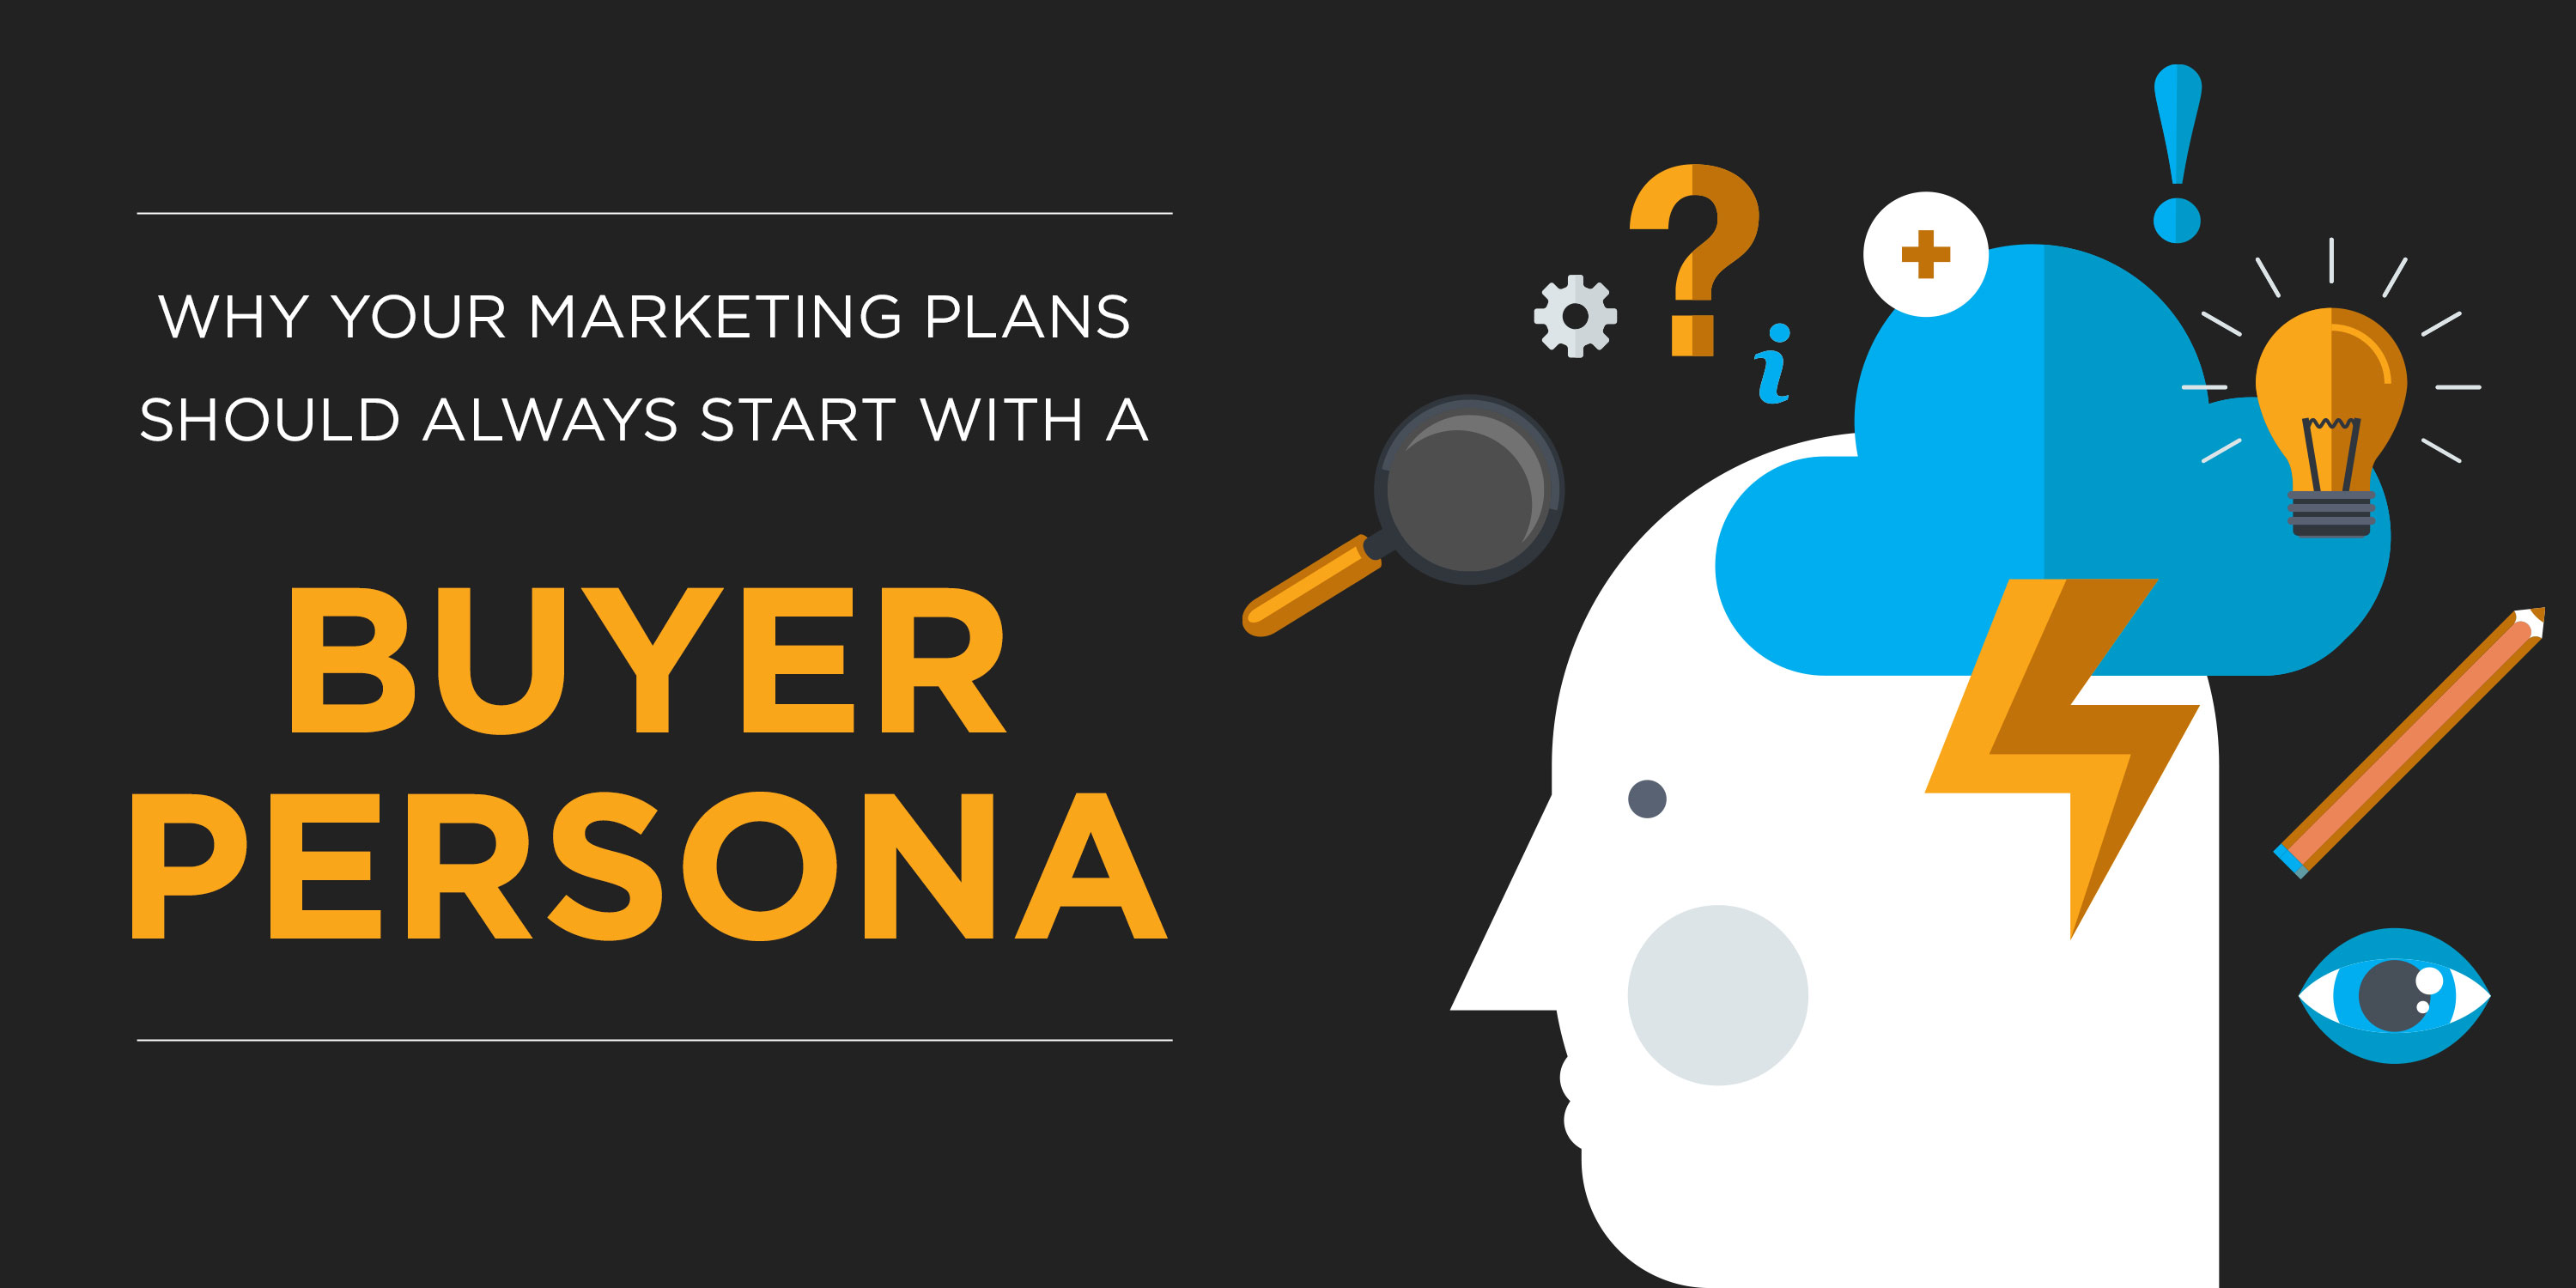 Know Thy Customer: Why Your Marketing Plans Should Always Start With A Buyer Persona